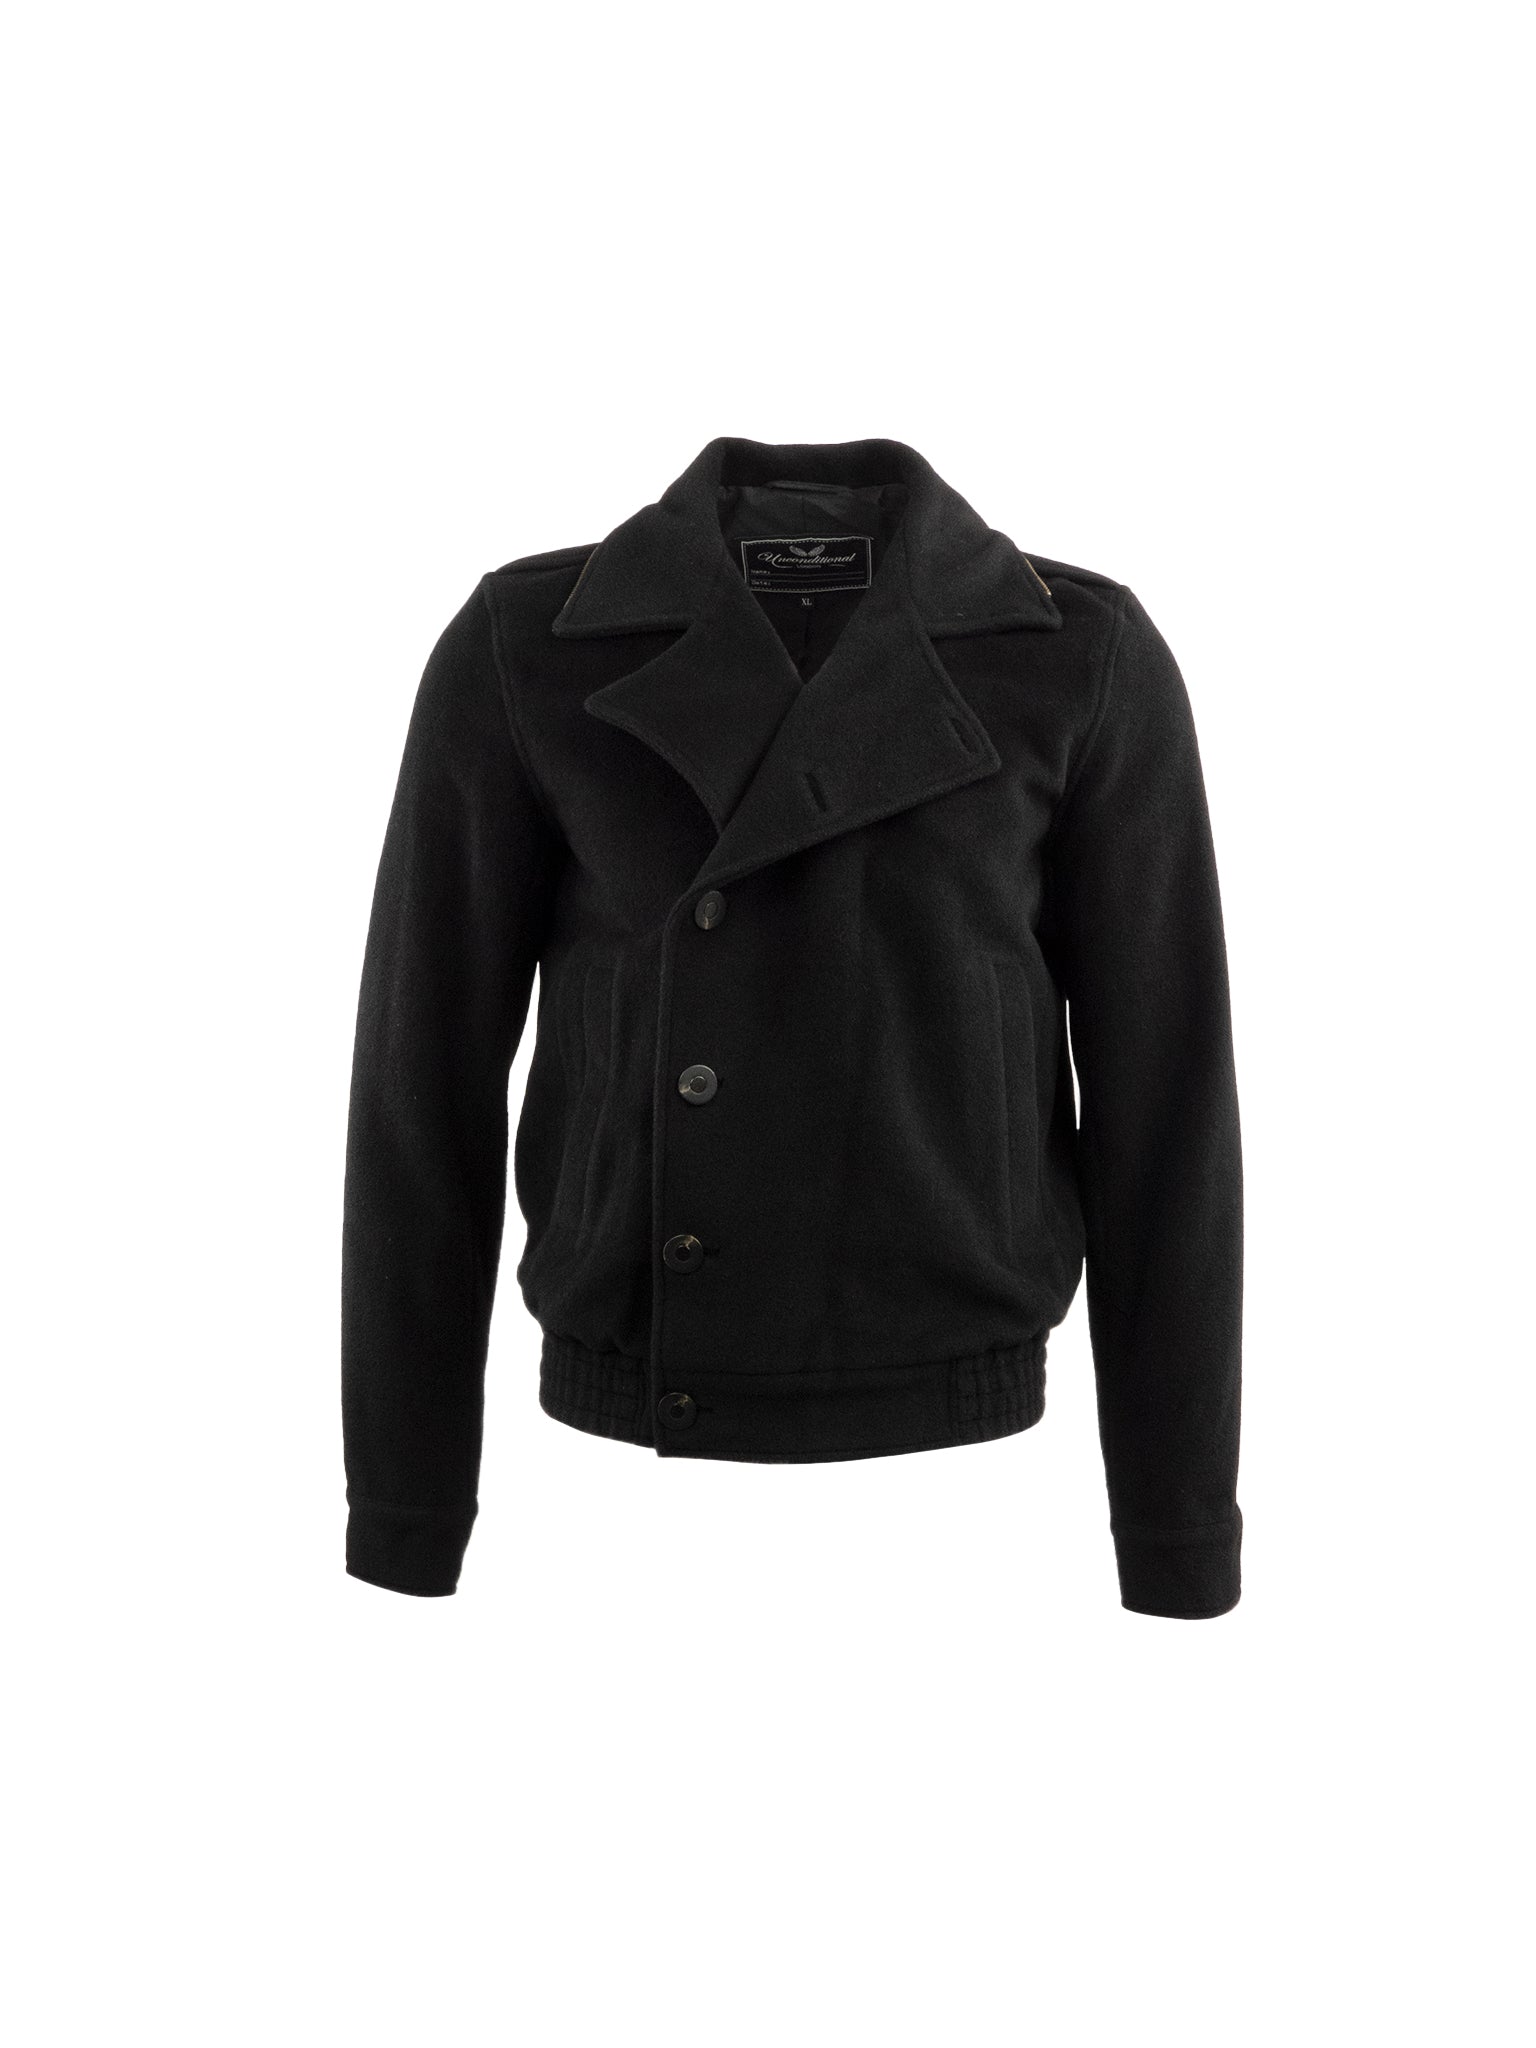 BLACK WOOL BUTTON UP HOODED JACKET